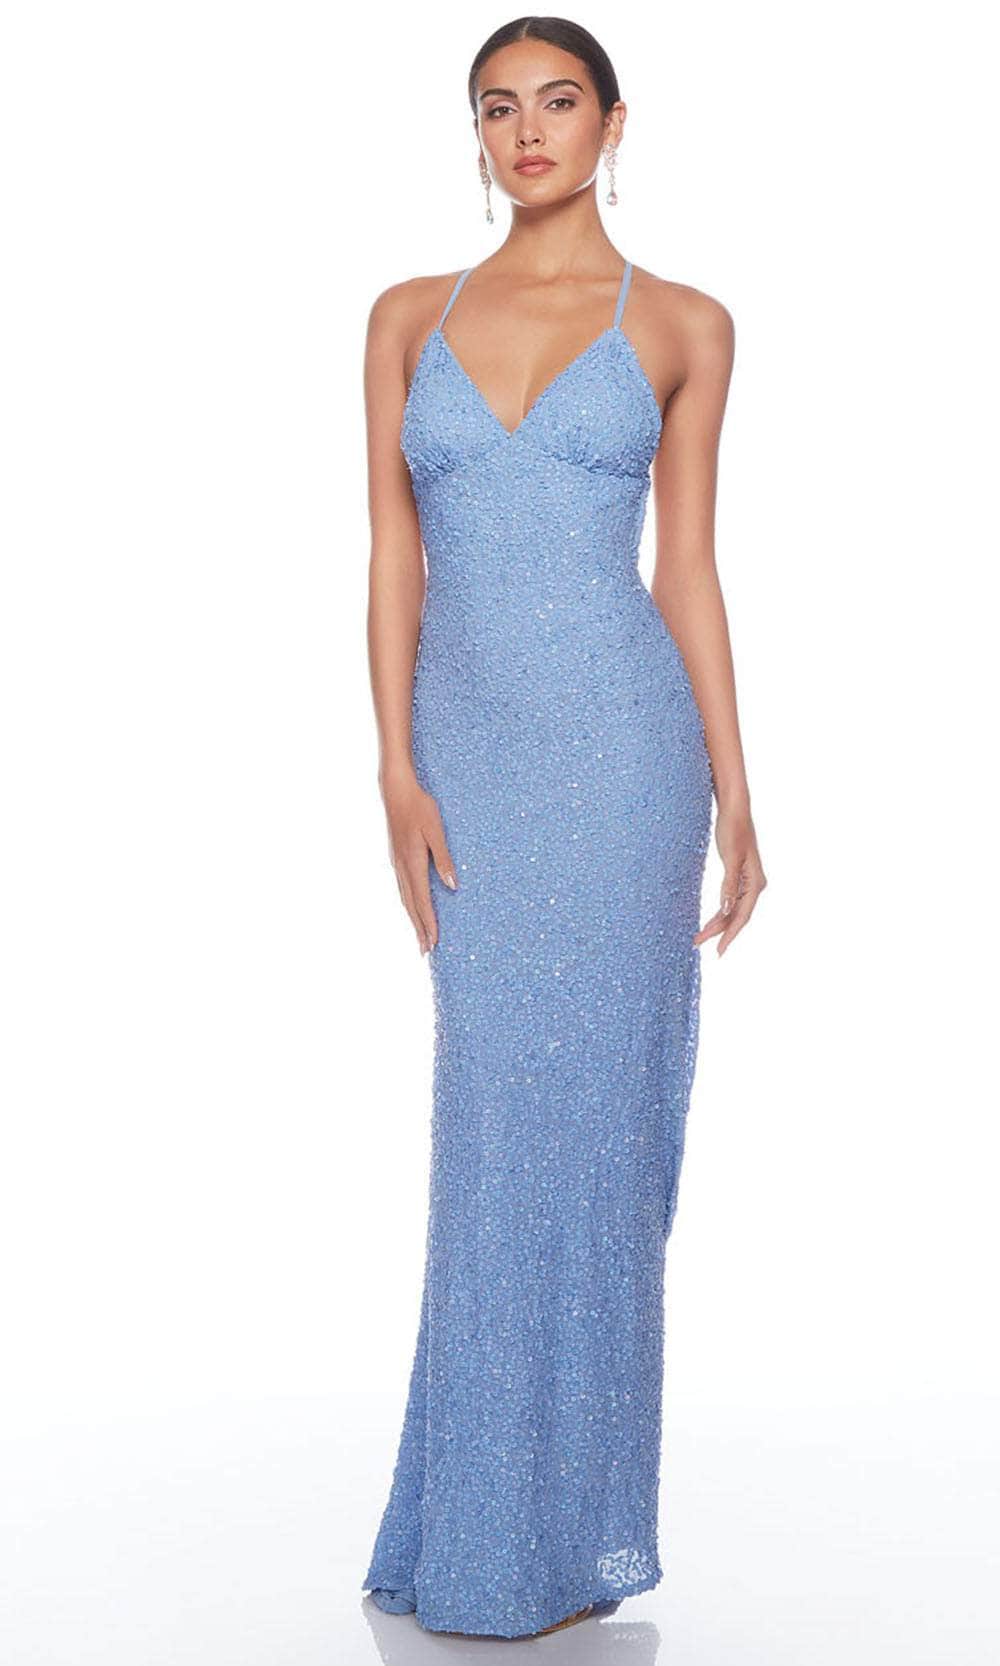 Alyce Paris 88003 - Sequin Open Back Prom Dress Special Occasion Dress